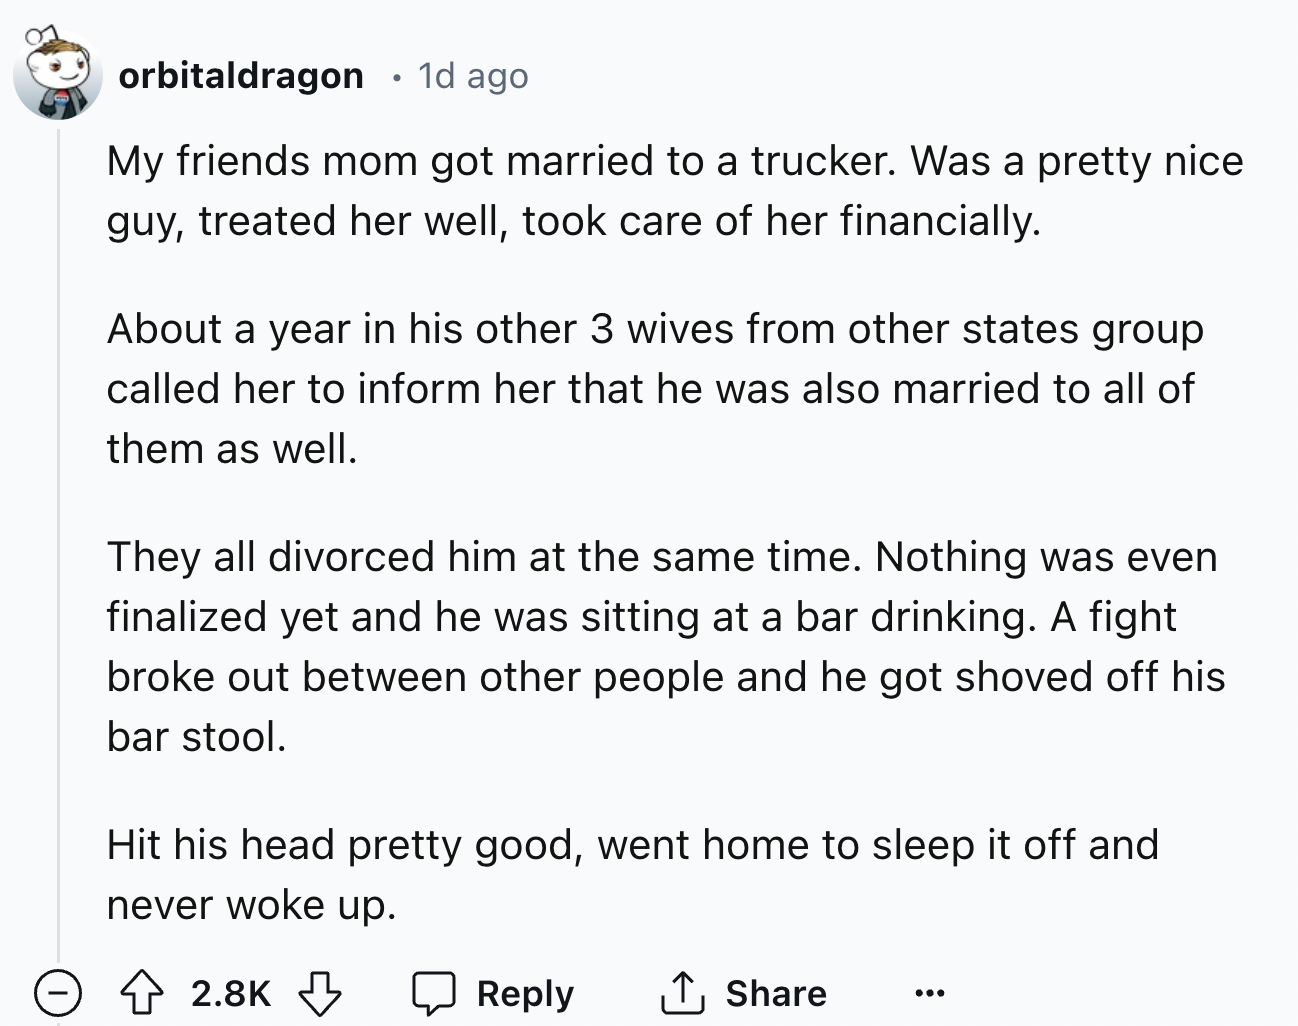 document - orbitaldragon . 1d ago My friends mom got married to a trucker. Was a pretty nice guy, treated her well, took care of her financially. About a year in his other 3 wives from other states group called her to inform her that he was also married t